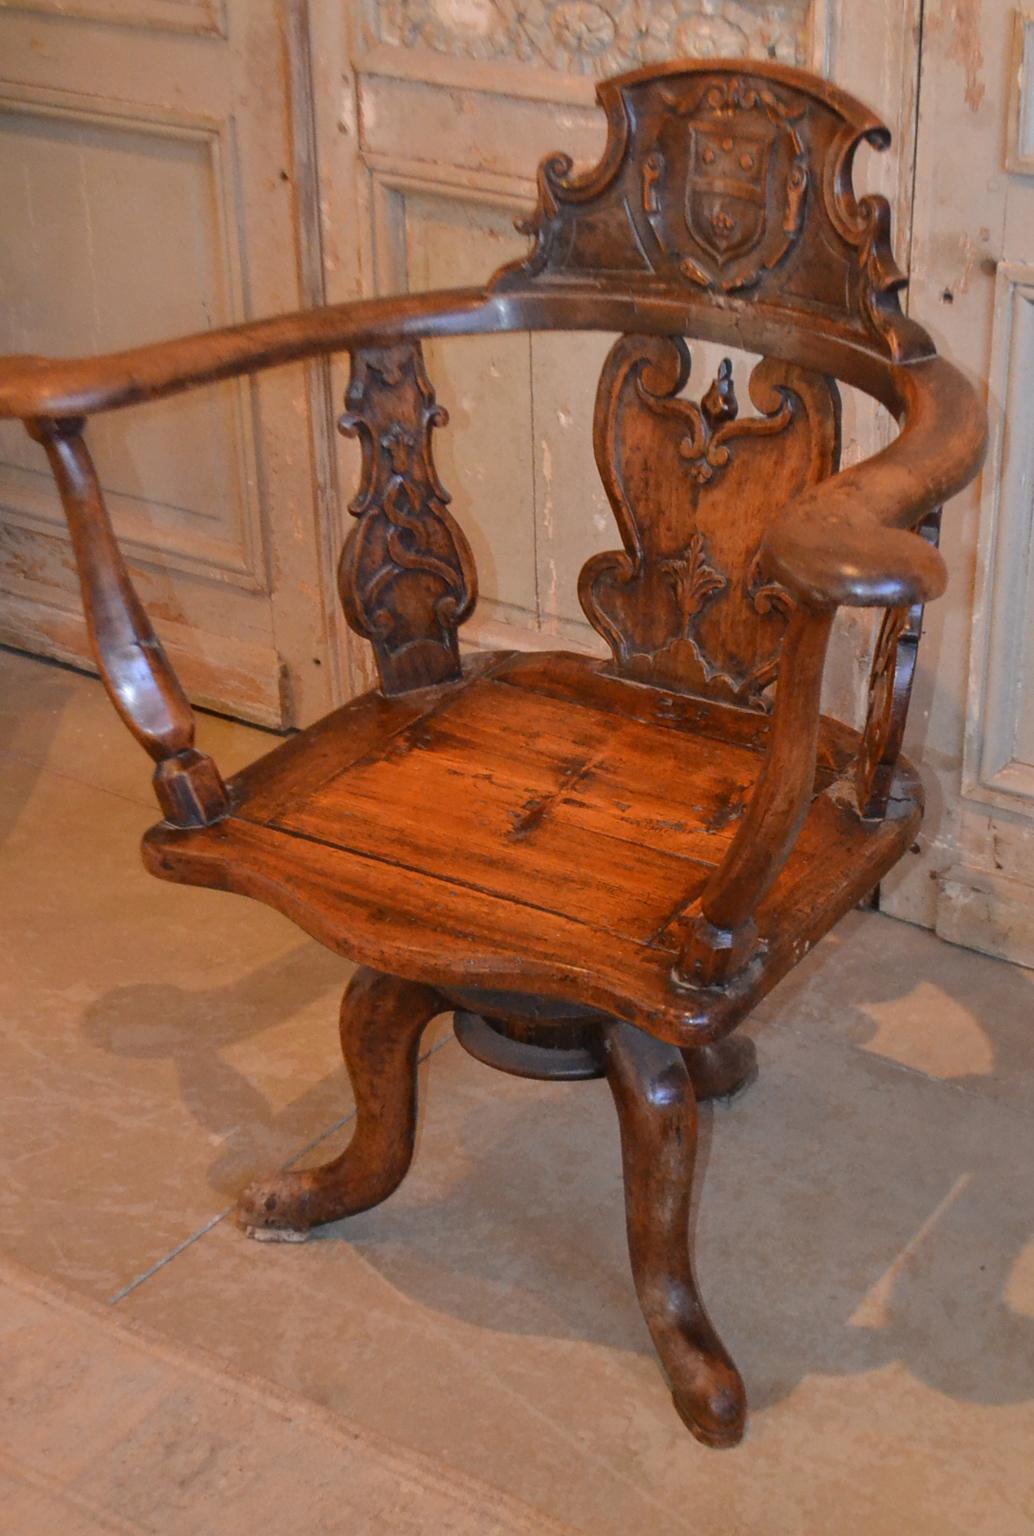 19th century Swiss hand carved wood chair with central cartouche and what appears to be a coat of arms, a carved molding of floral and scroll motifs for the vertical rails, rounded arm rests on octagonal carved cylinder supports, flat seat resting